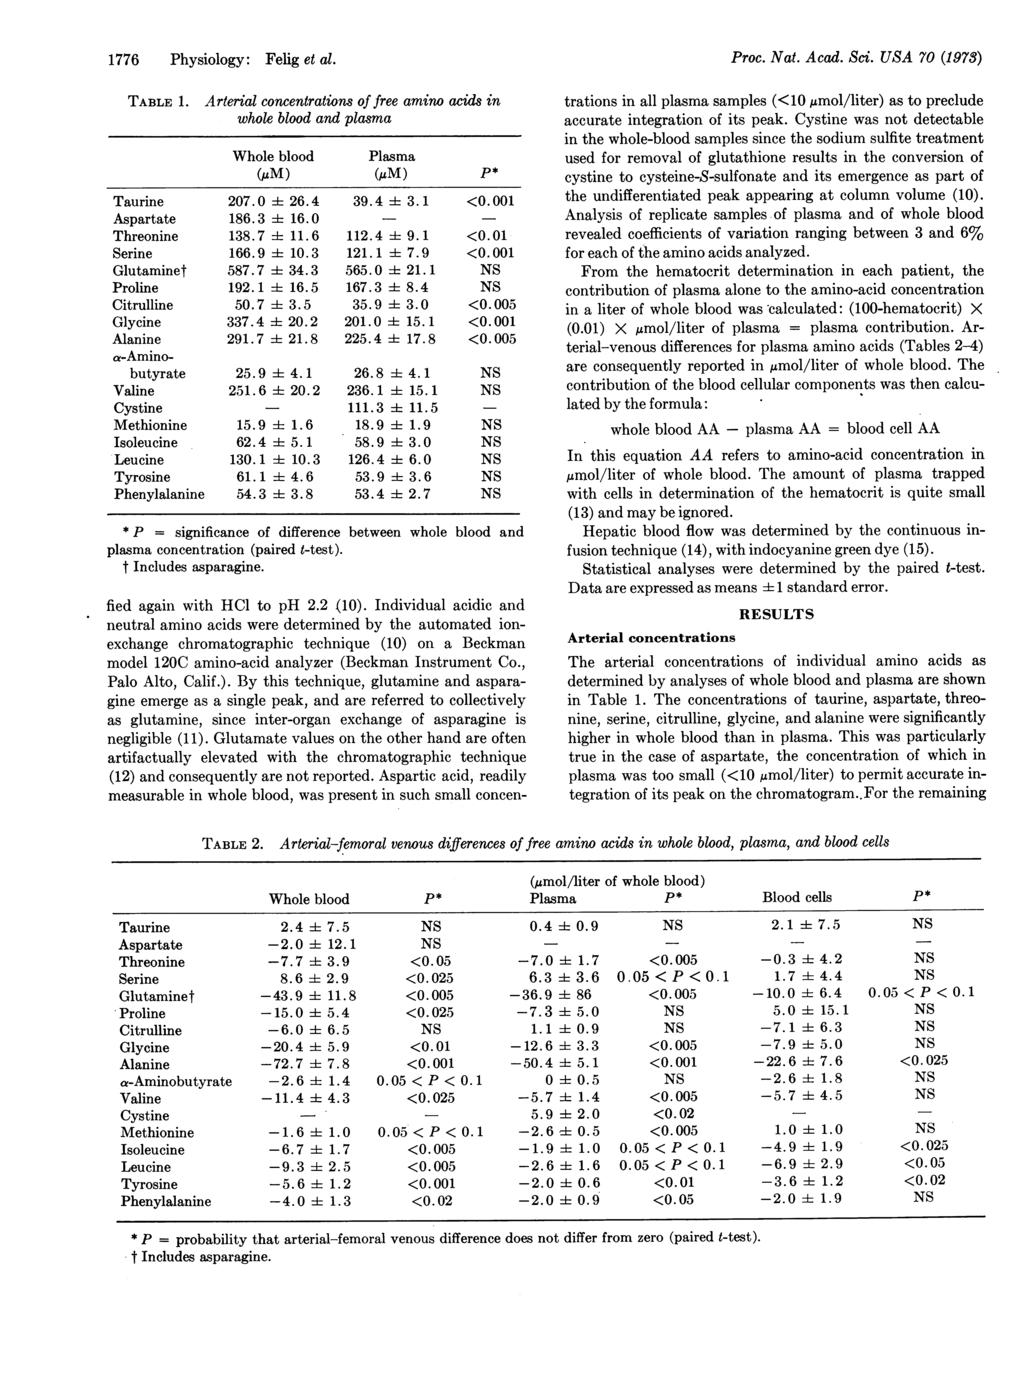 1776 Physiology: Felig et al. TABLE 1. Arterial concentrations of free amino acids in whole blood and plasma Whole blood Plasma (#M) (MM) P* Taurine 207.0 i 26.4 39.4 4± 3.1 <0.001 Aspartate 186.